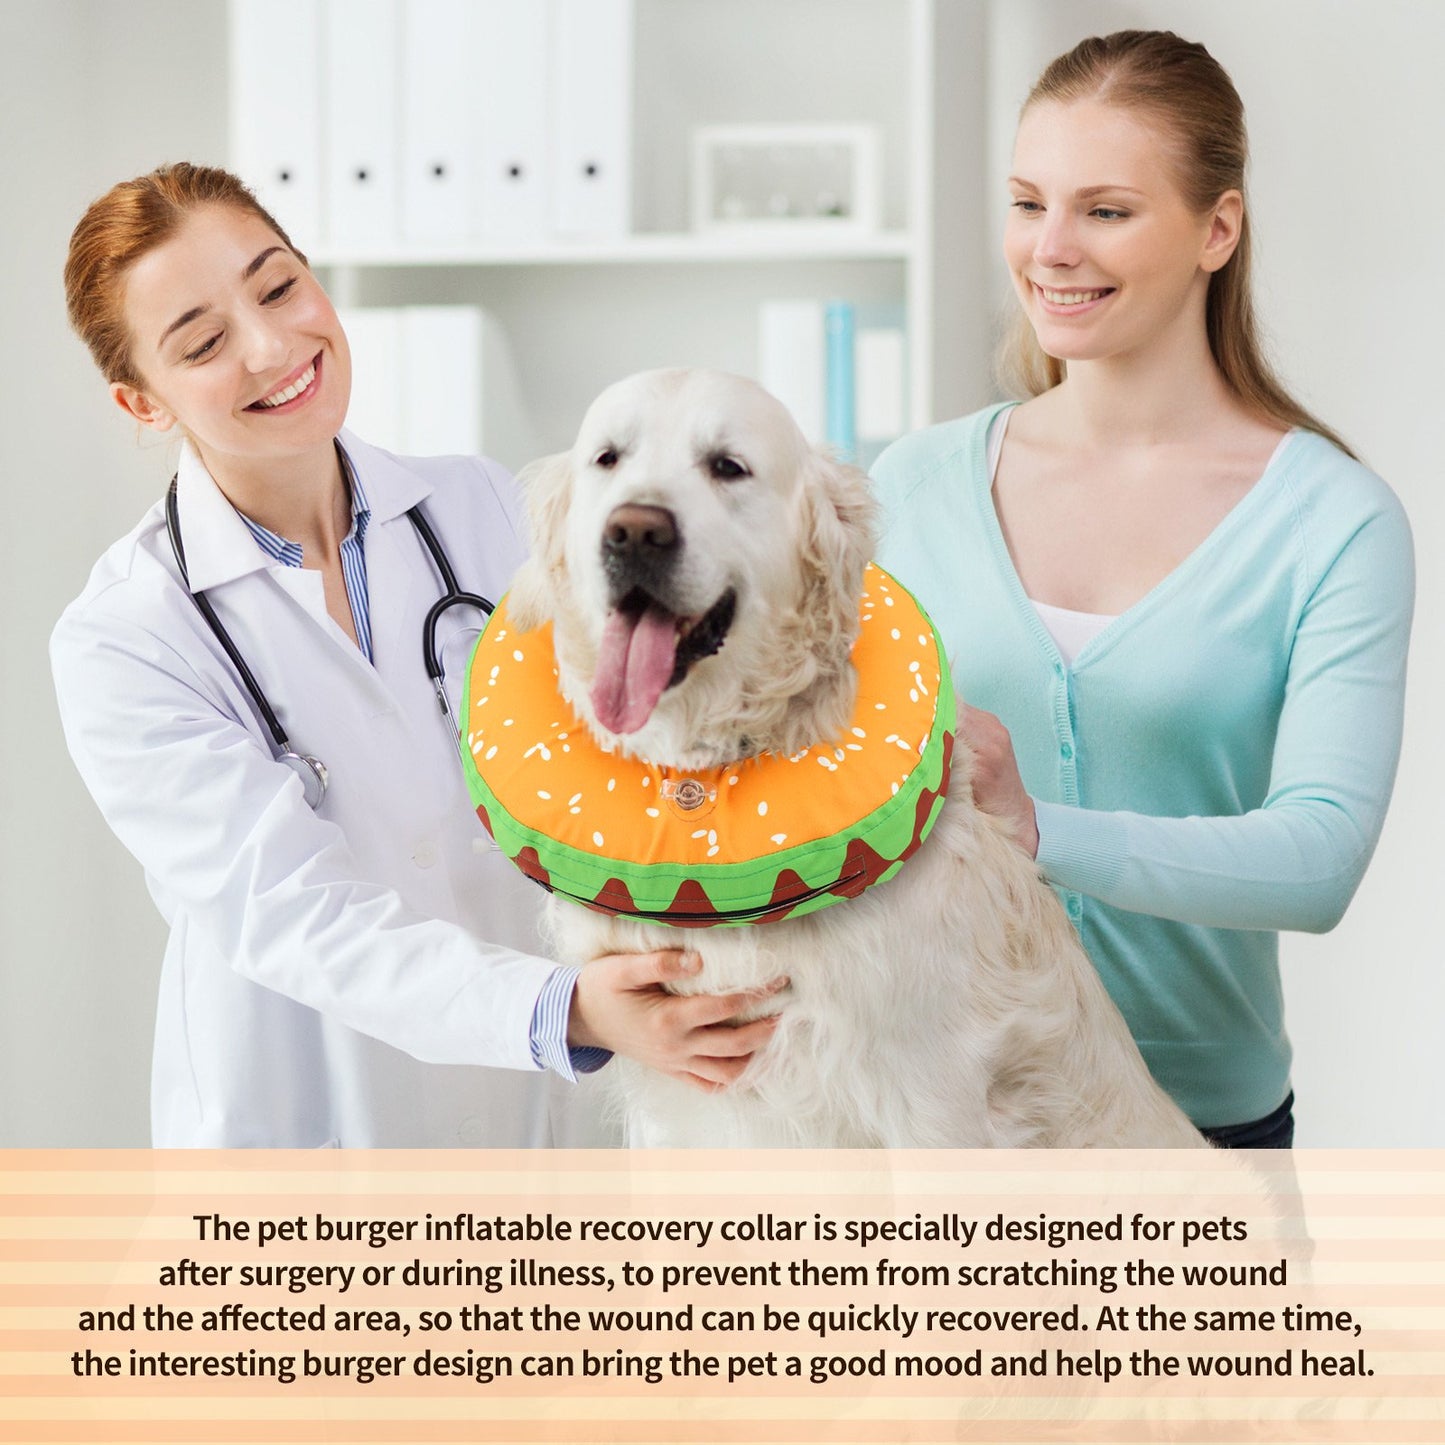 Dog Cone Protective Elizabethan Collar for Dogs Recovery Collar After Surgery Anti-Bite Lick Wound Soft,Inflatable ,Comfortable Cone of Shame for Medium Dogs-L